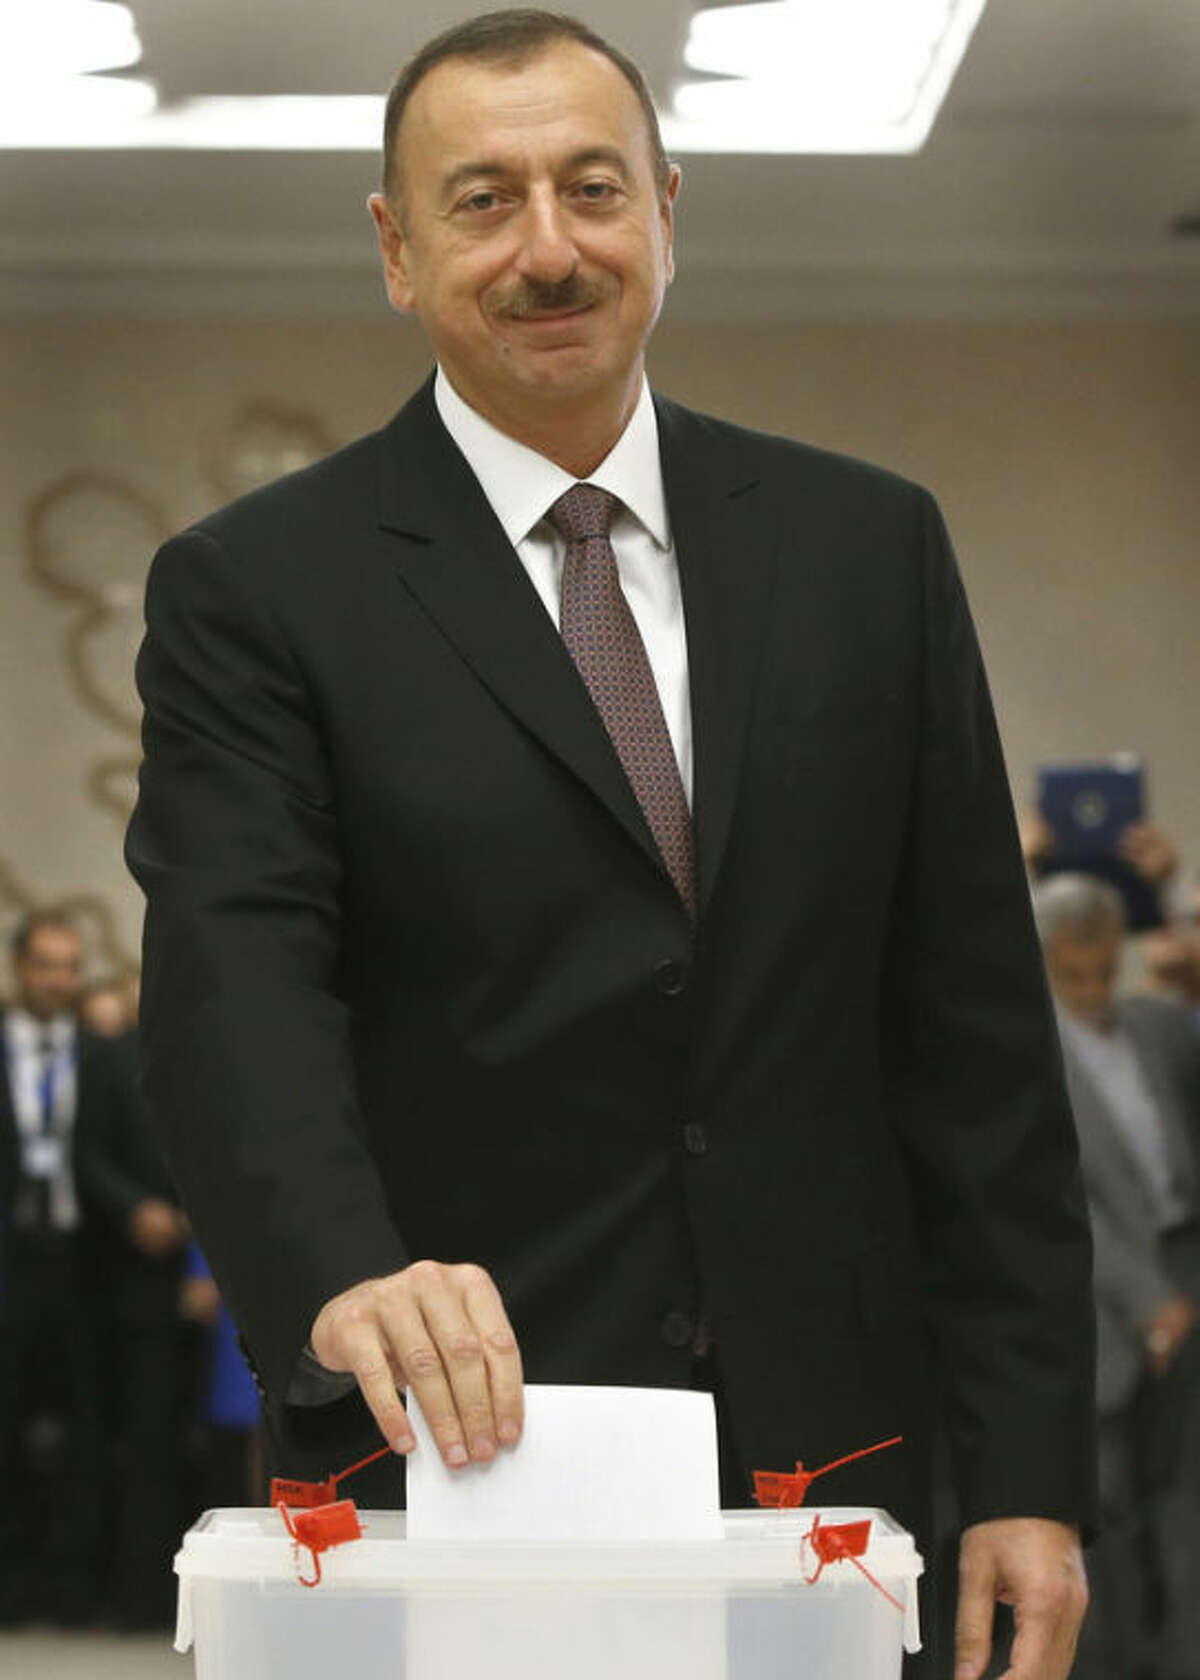 Azerbaijan President Ilham Aliyev casts his ballot paper during the voting at a polling station in Baku, Azerbaijan, Wednesday, Oct. 9, 2013. Presidential election begins in the oil-rich Caspian nation. (AP Photo/Sergei Grits)